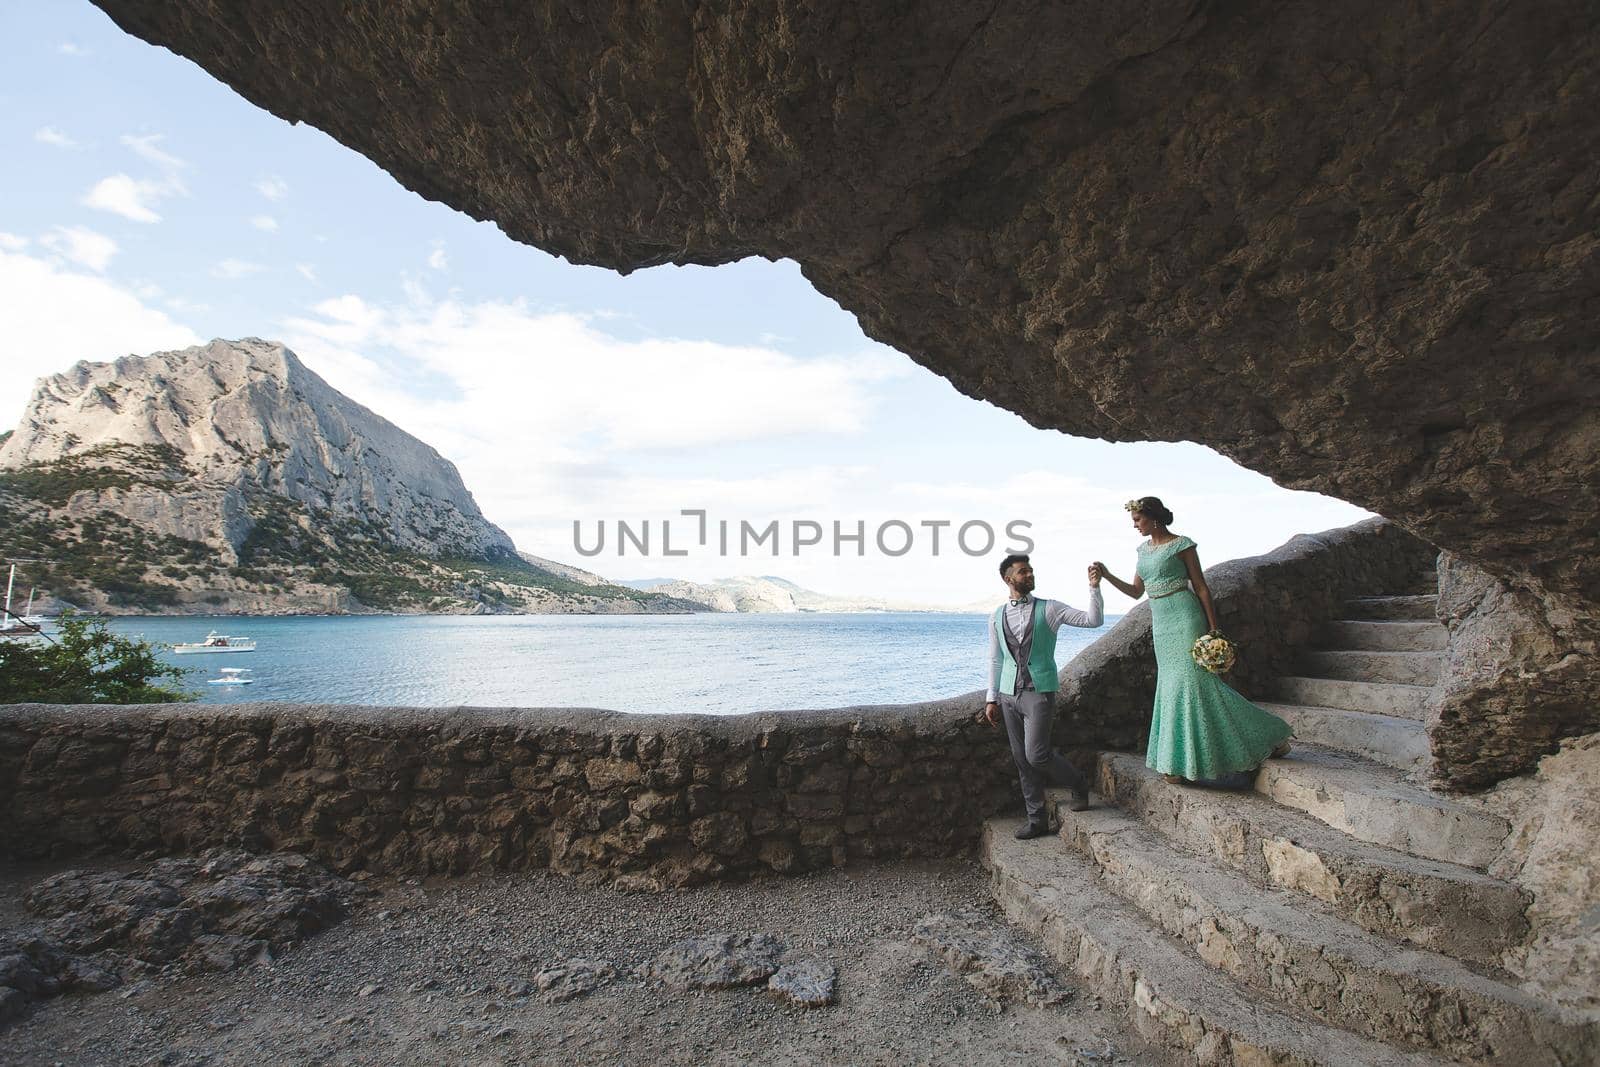 The bride and groom on nature in the mountains near the water. Suit and dress color Tiffany. Walk hand in hand.